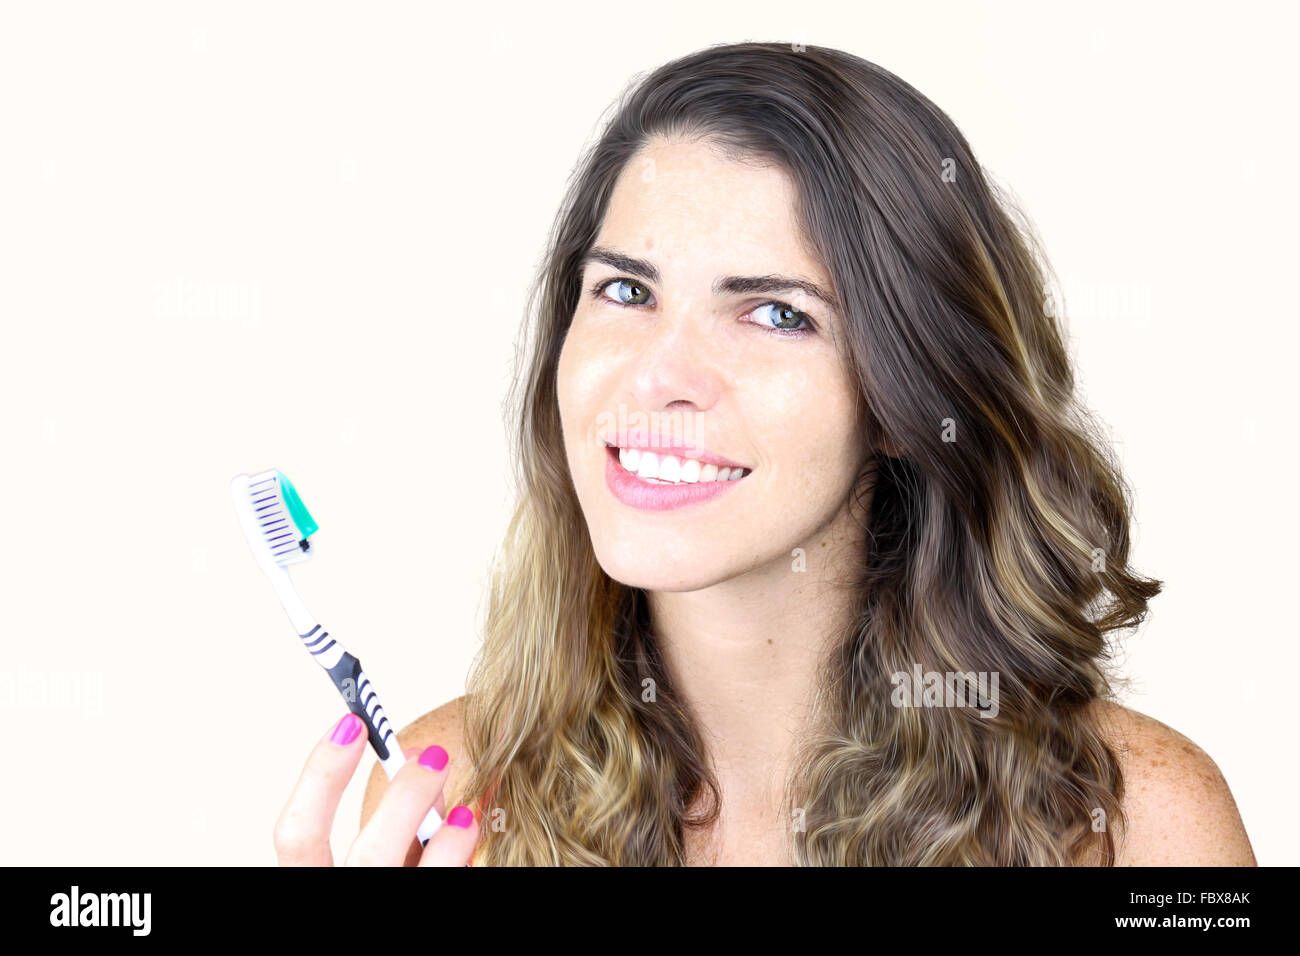 Beautiful young lady holding toothbrush and smiling Stock Photo